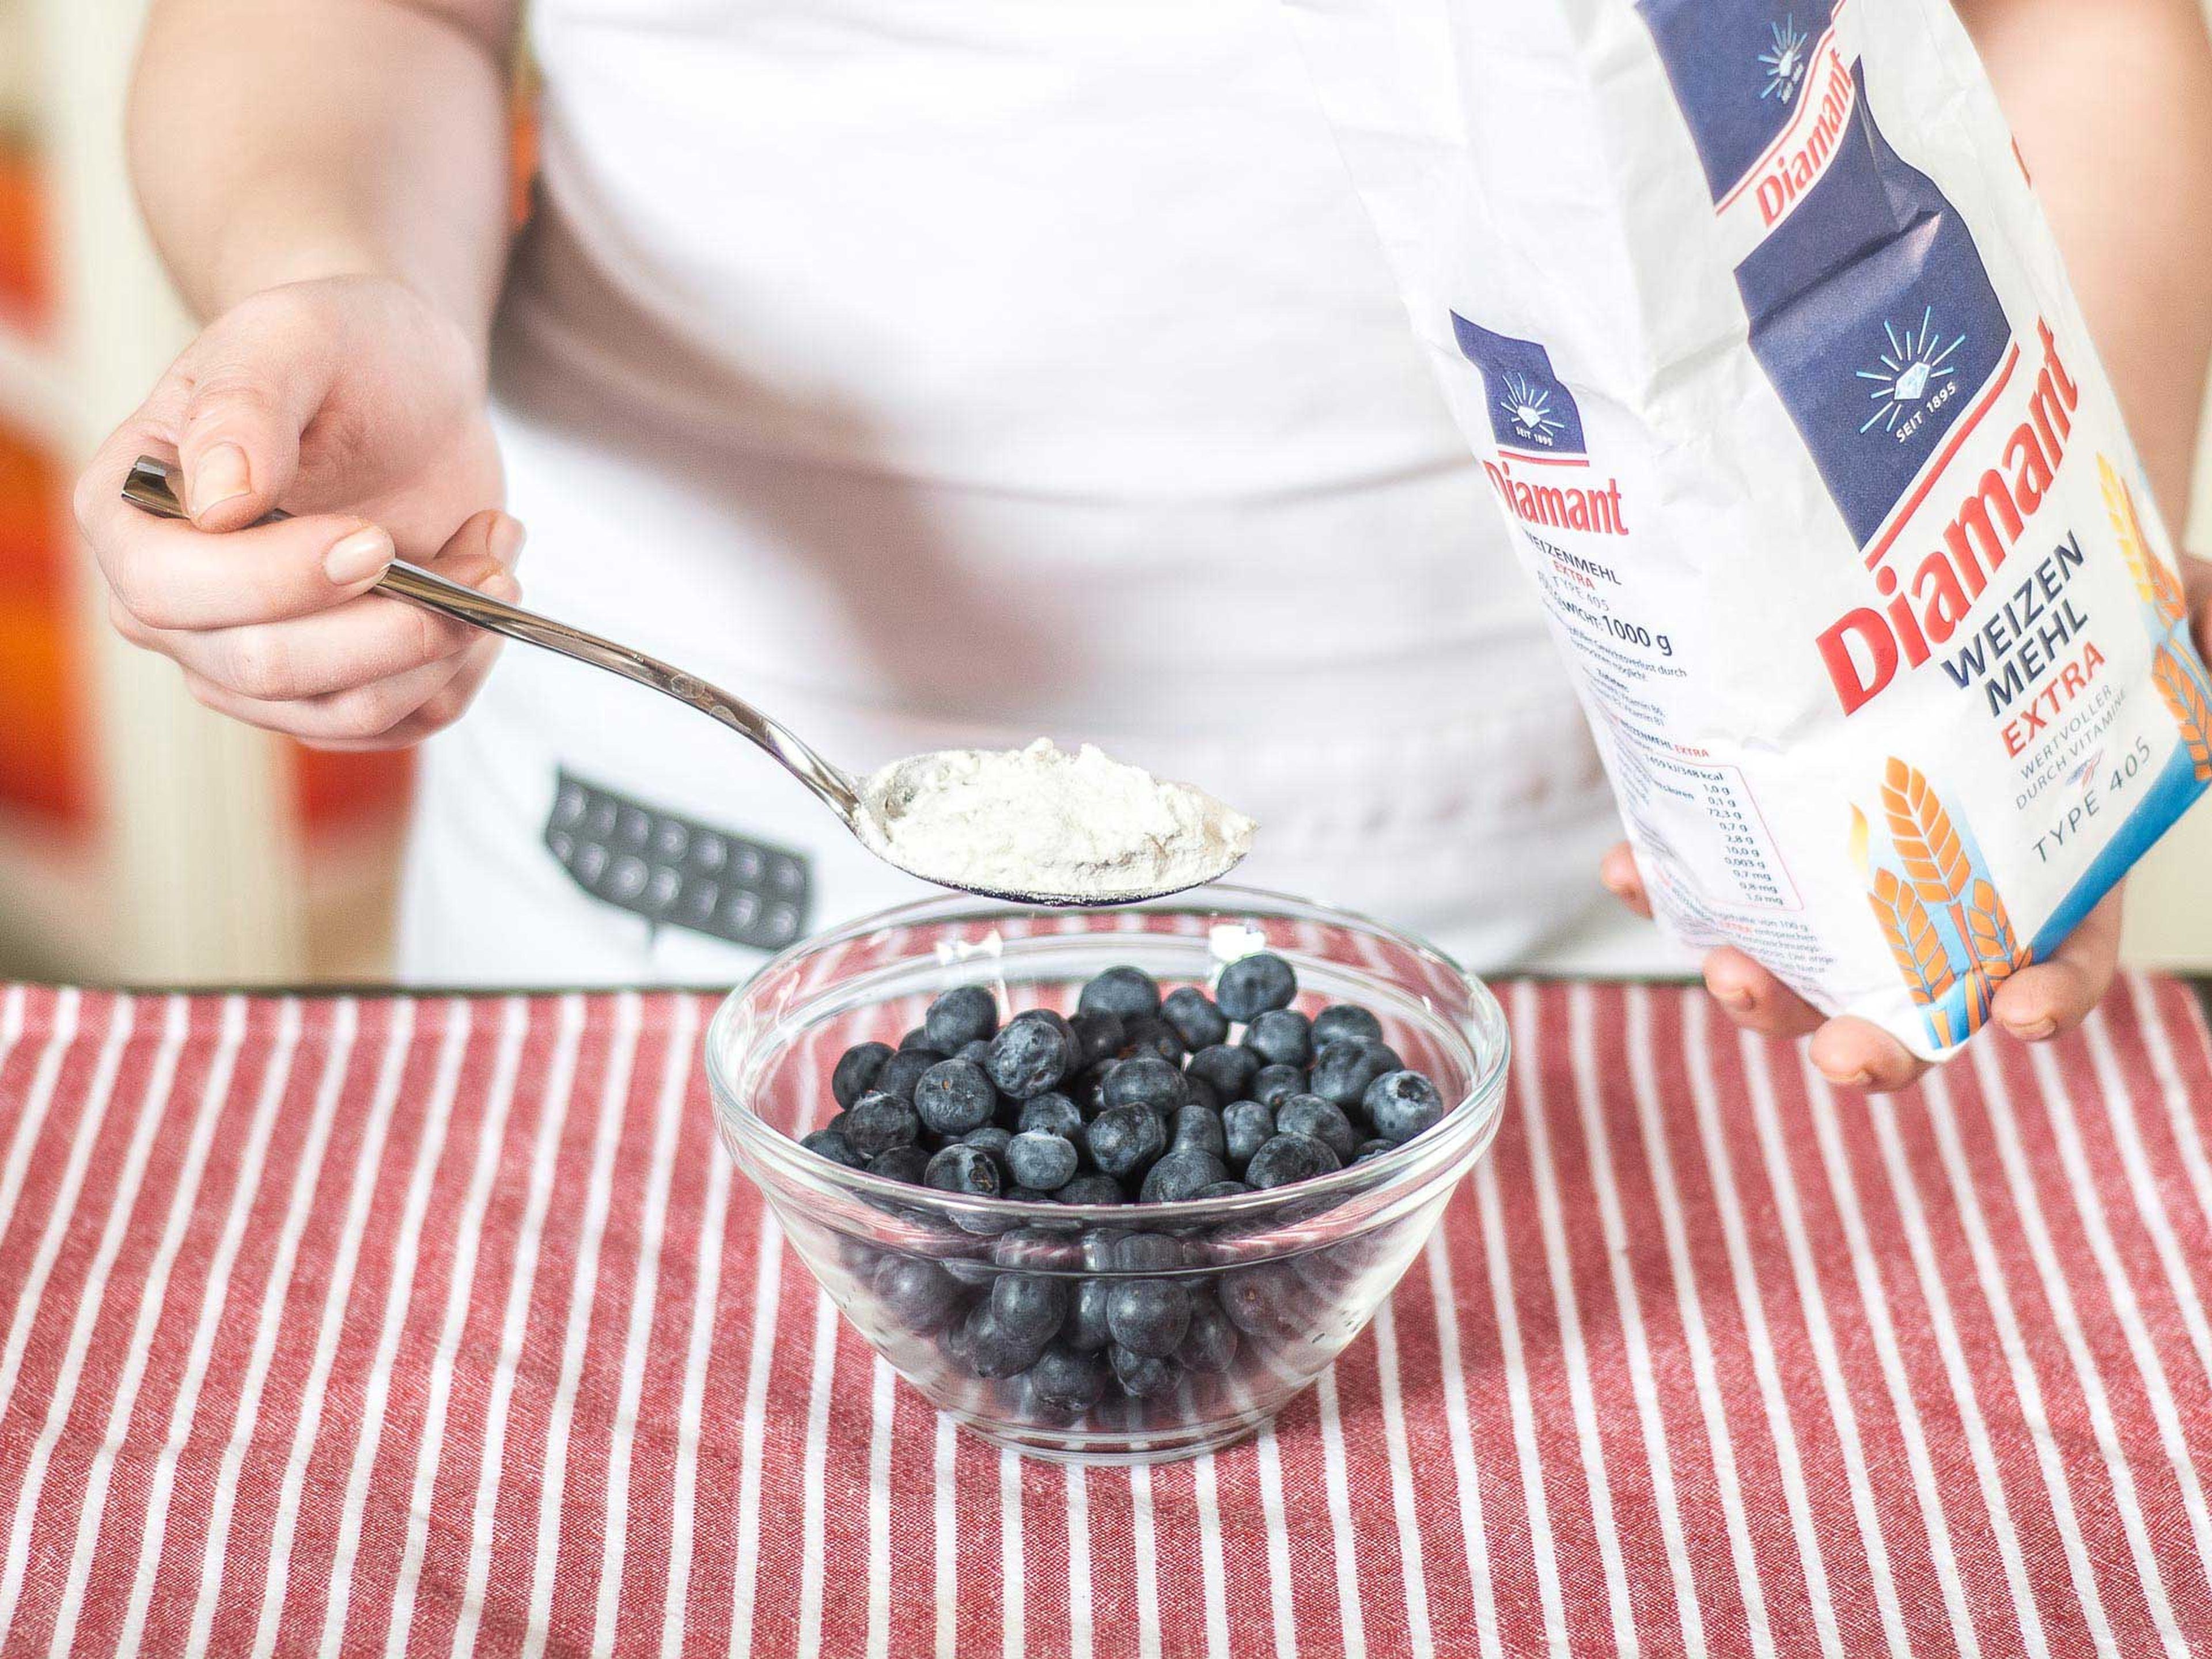 In another bowl, mix blueberries with the rest of the flour. This slight coating prevents them from sinking to the bottom during baking.